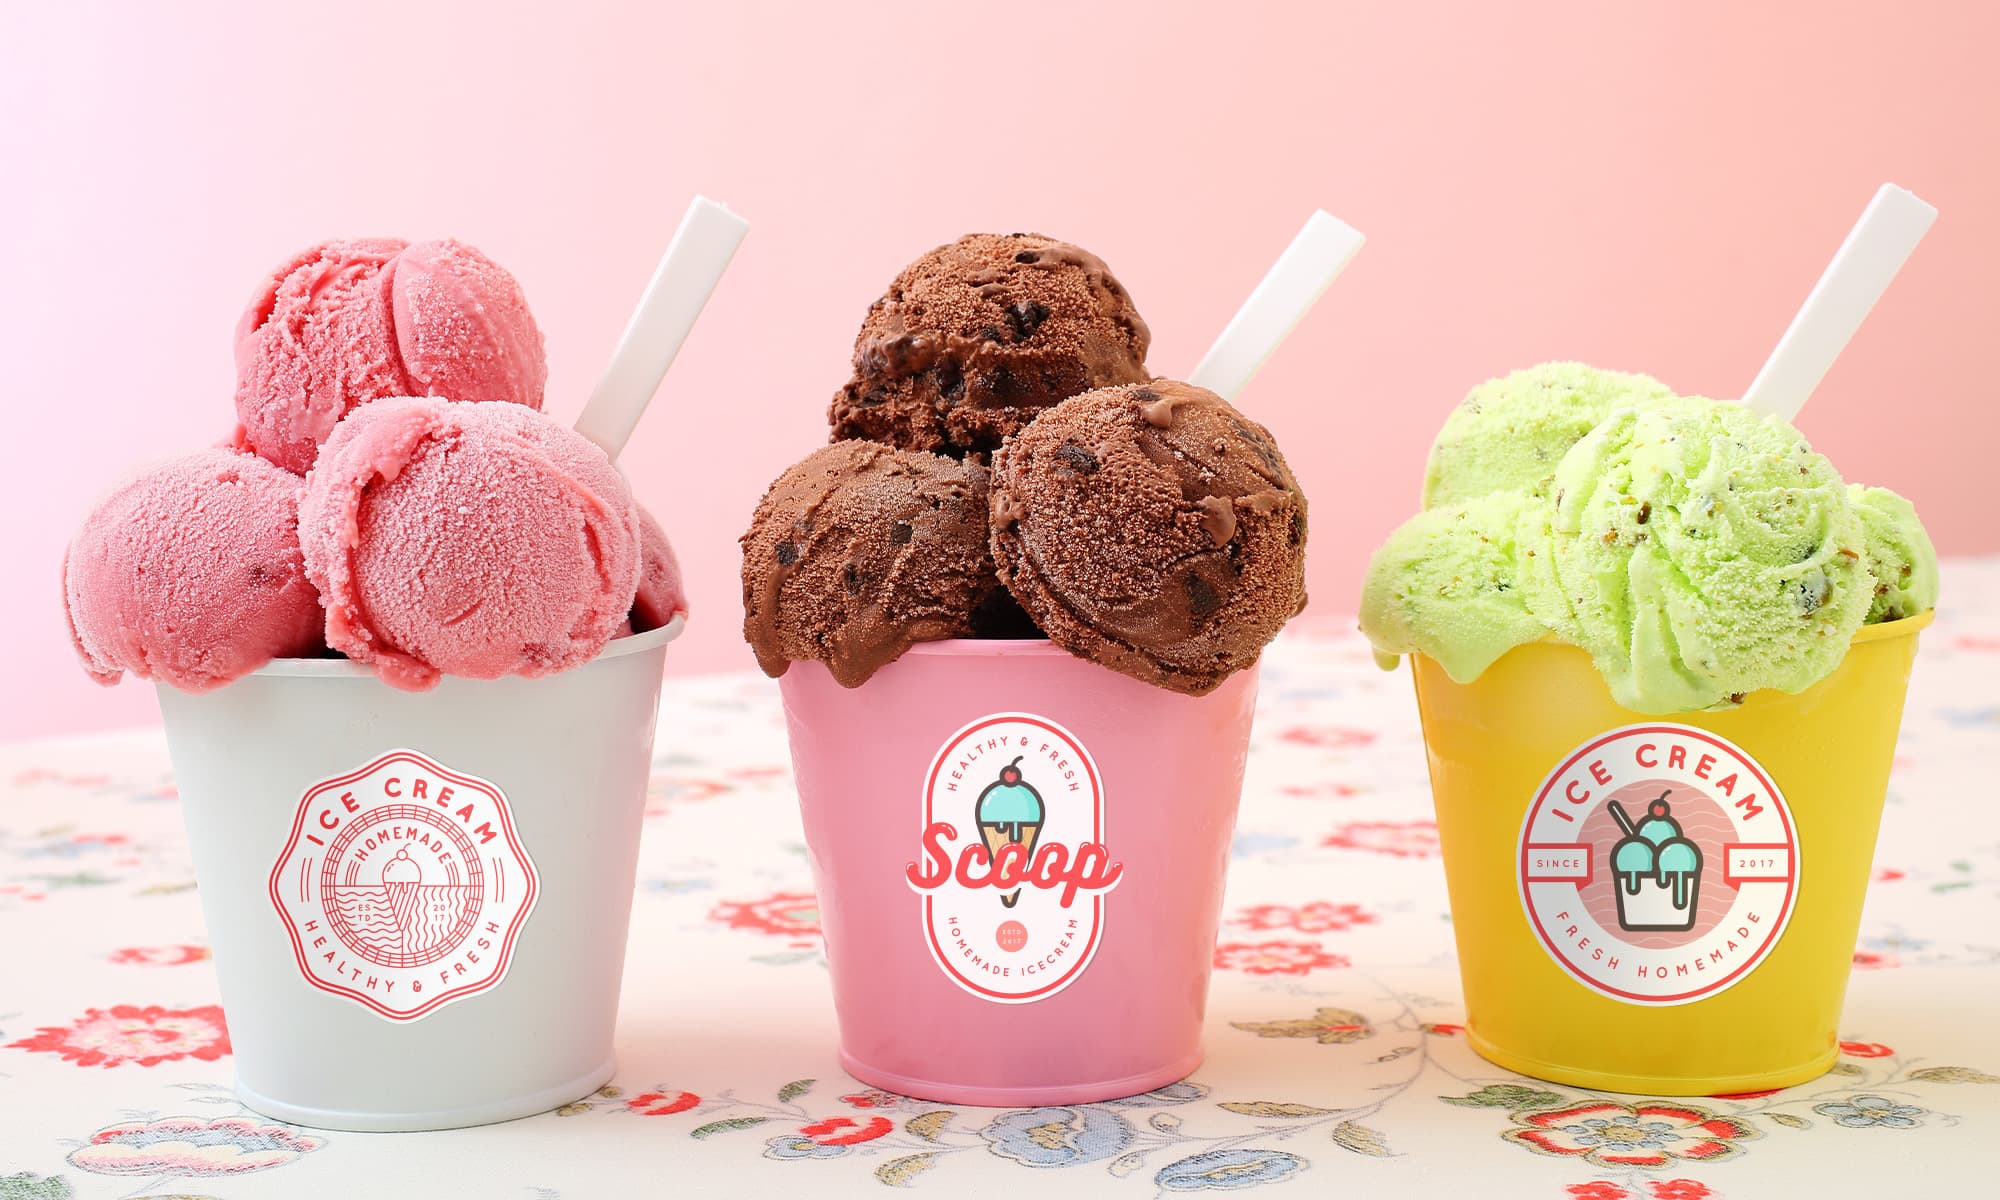 Multiple flavours of ice cream in containers with different coloured food label designs